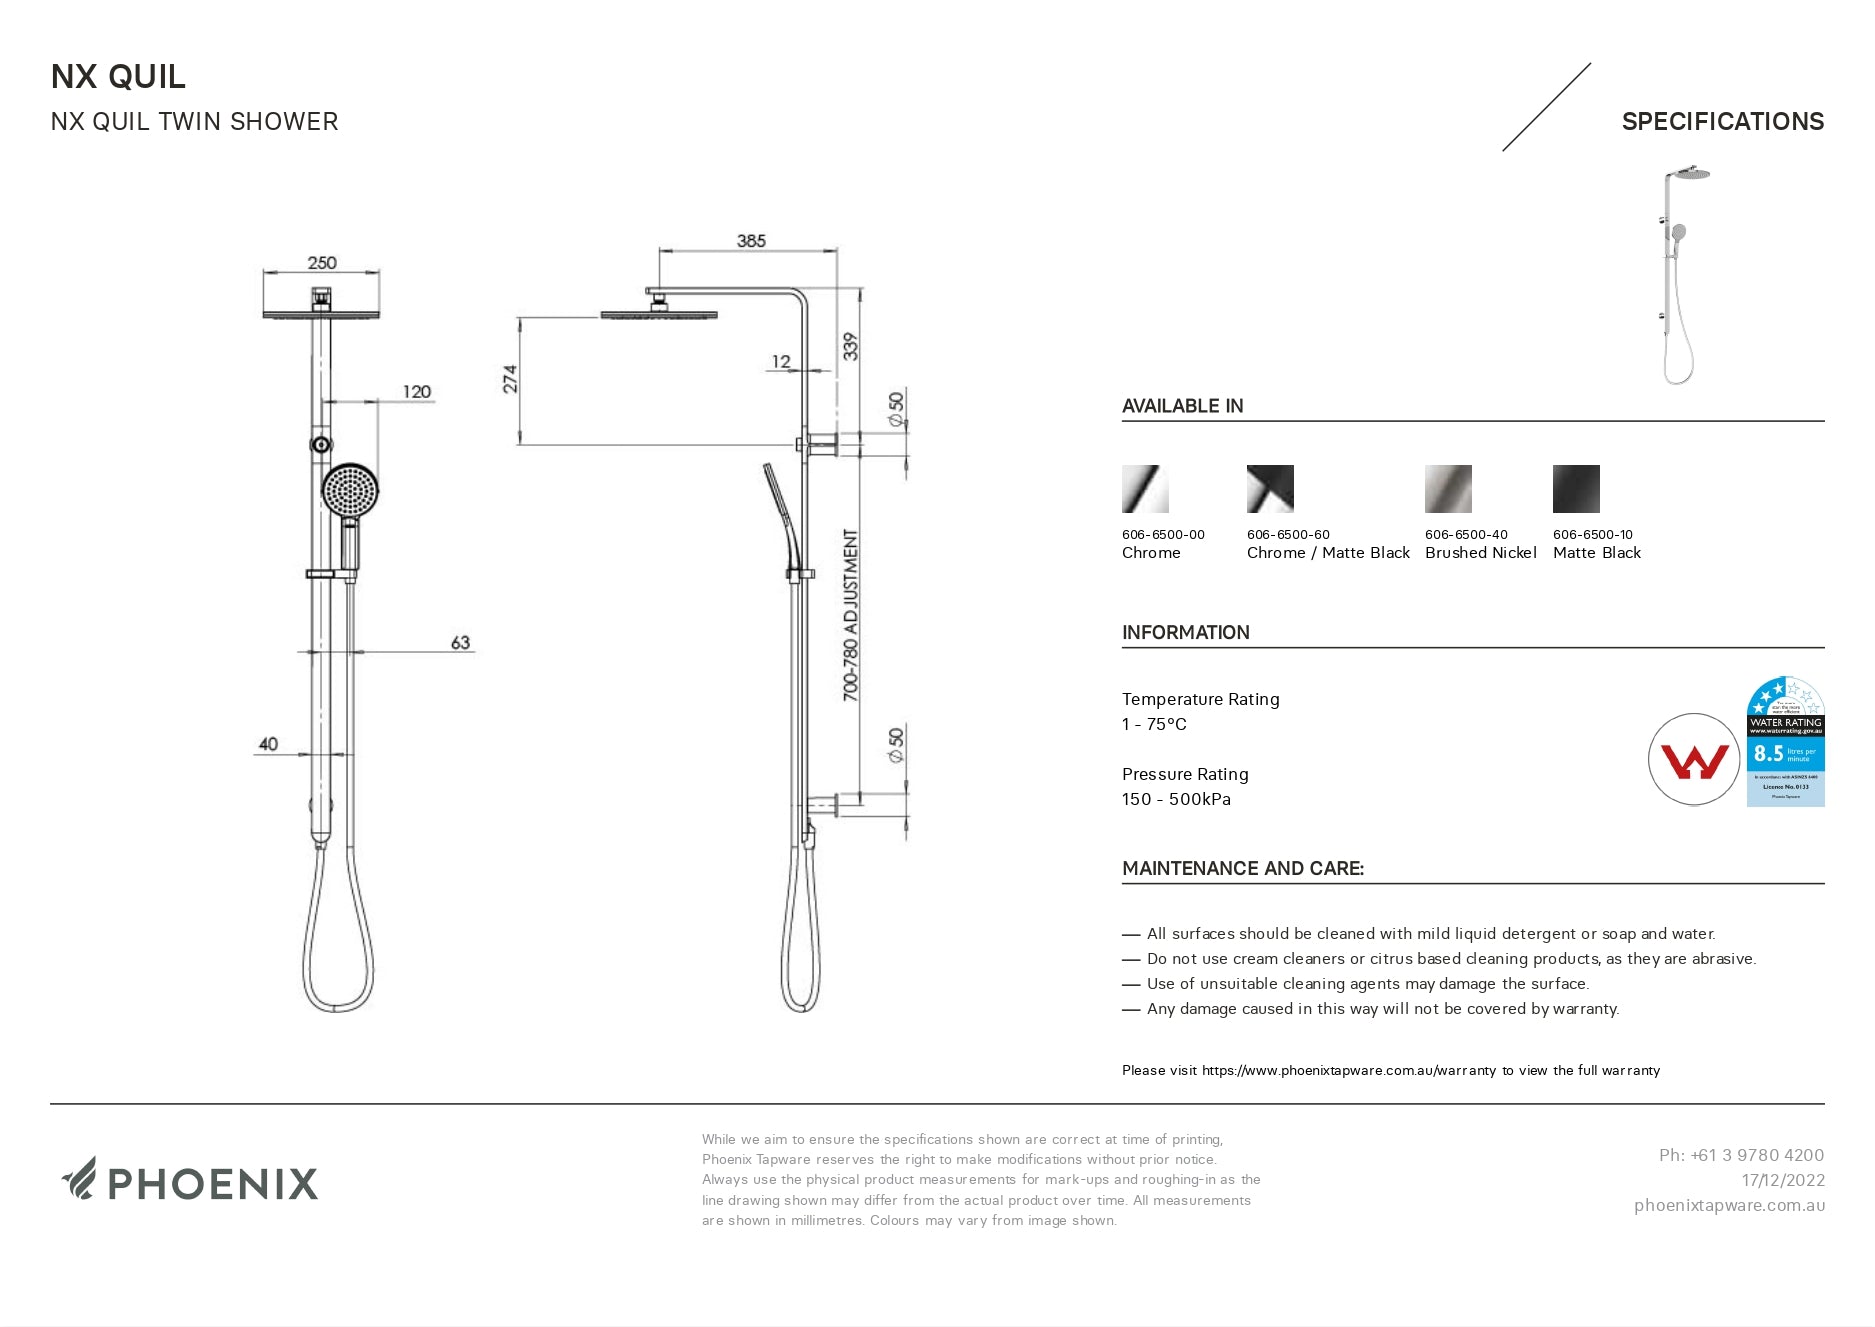 PHOENIX NX QUIL TWIN SHOWER CHROME AND MATTE BLACK